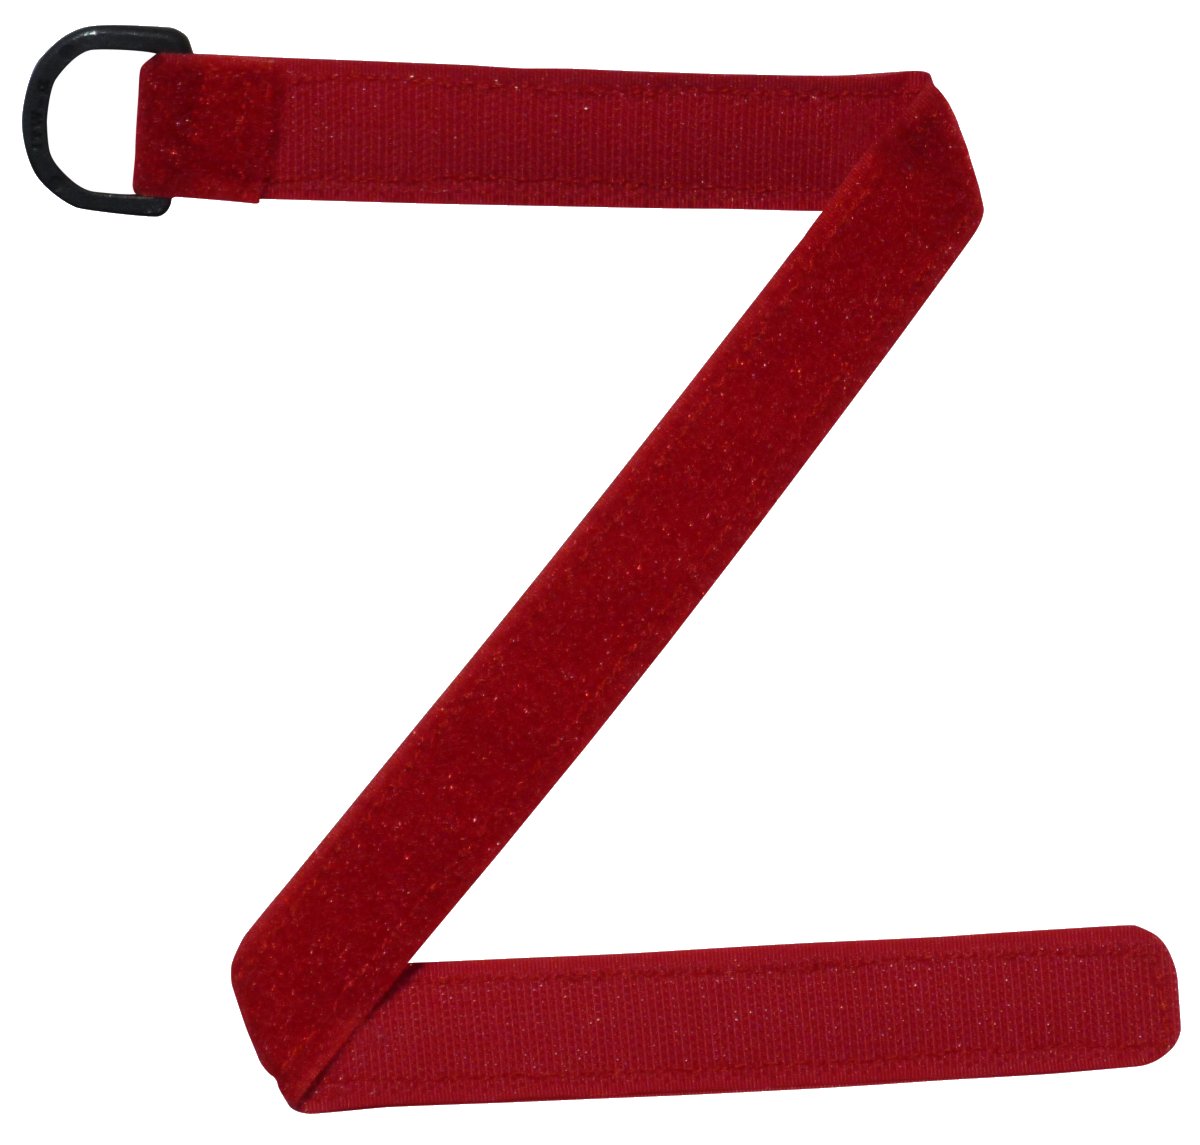 Benristraps 25mm Hook and Loop Strap with D Ring (Pair) in red